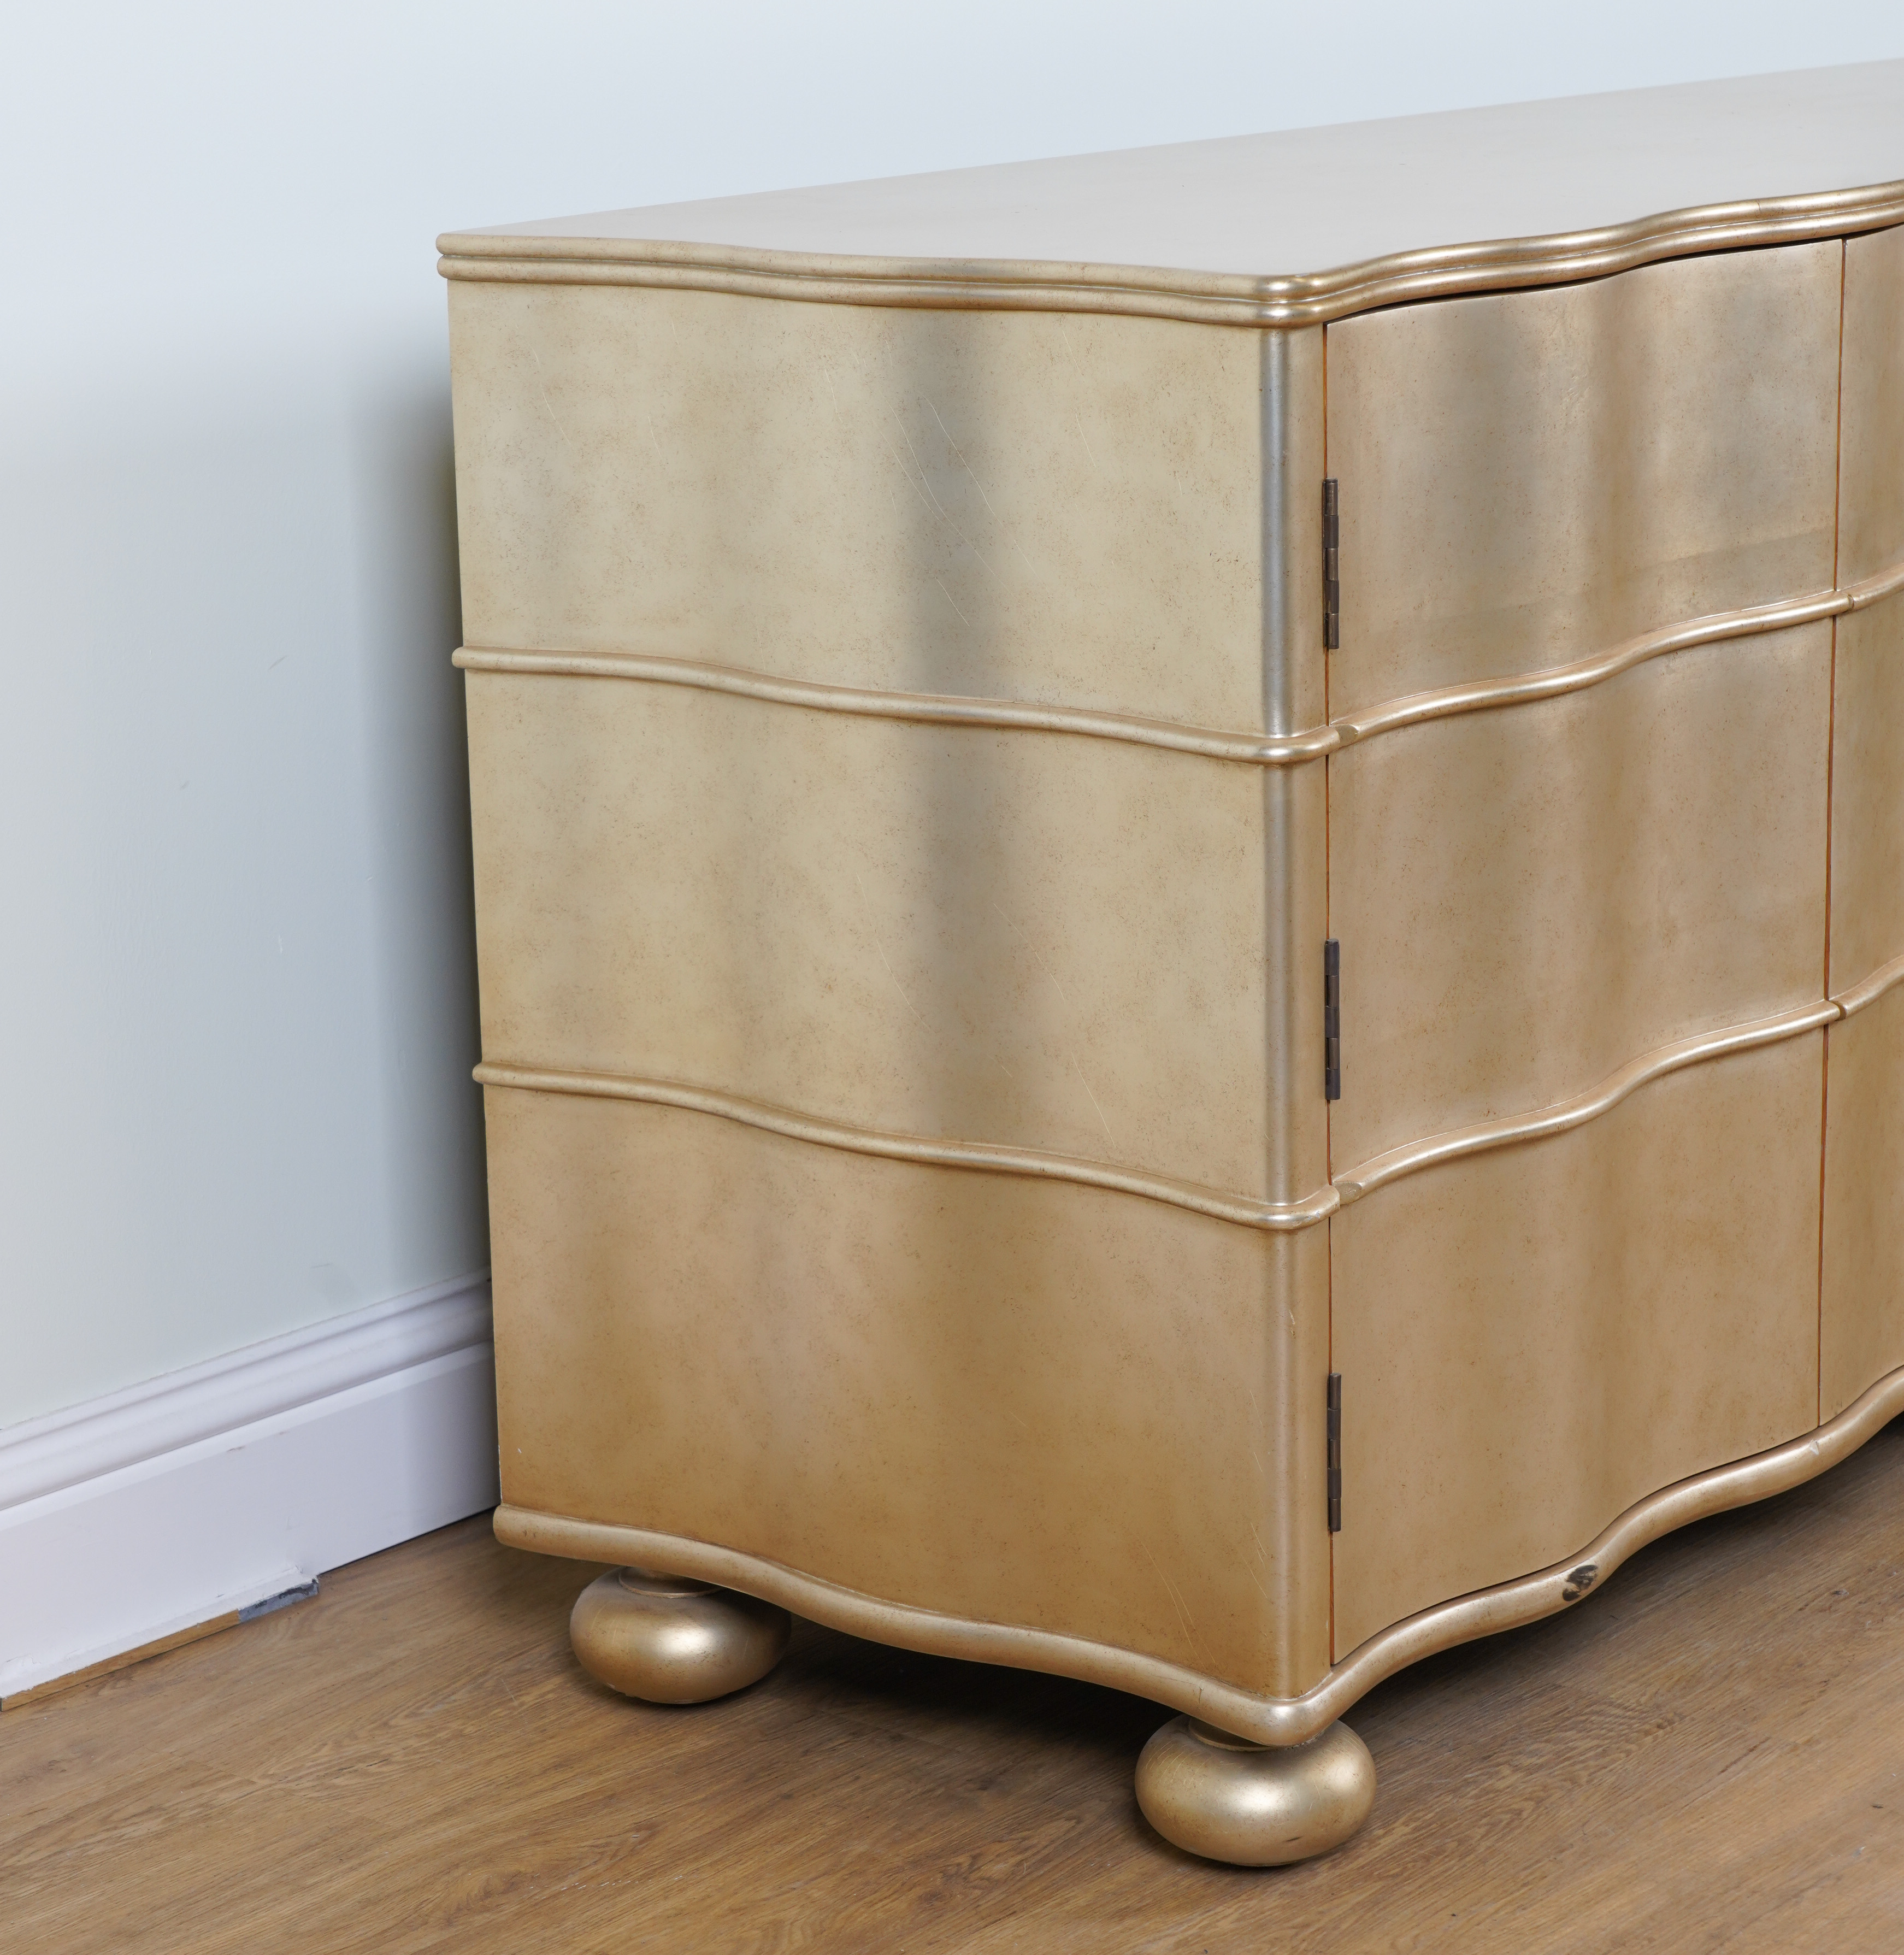 PAUL MARTIN; A GOLD PAINTED WAVY FRONTED FOUR DOOR LOW CABINET - Image 4 of 4